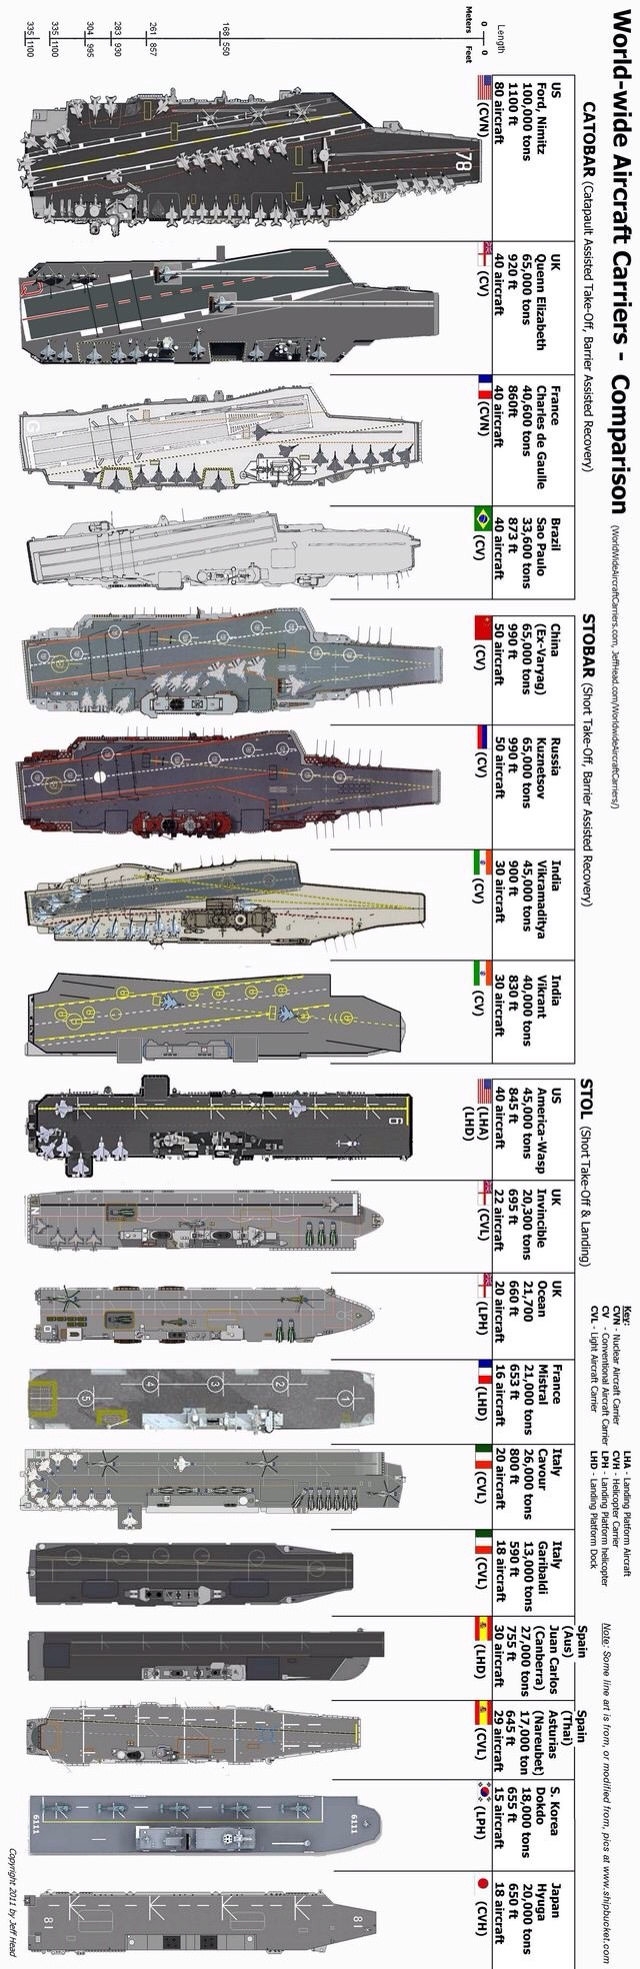 The mighty aircraft carrier